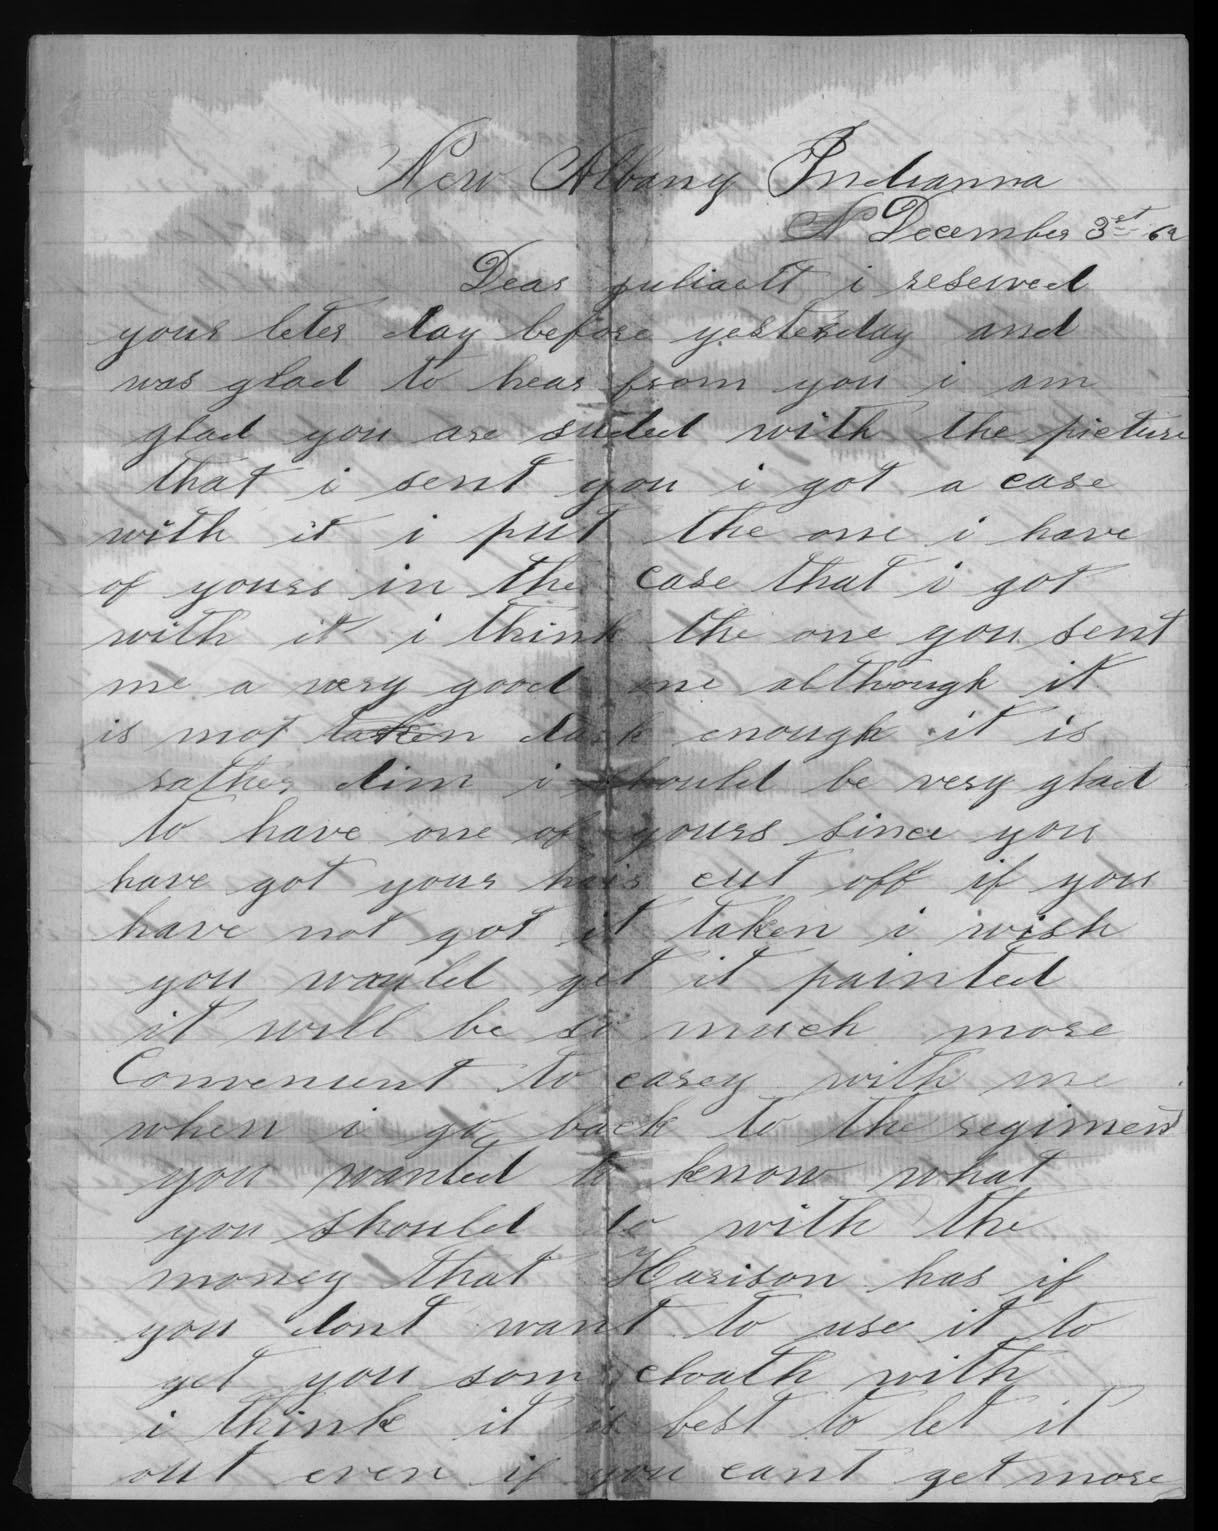 Letter, Charles Caley, New Albany, Indiana, to Juliaette Carpenter Caley